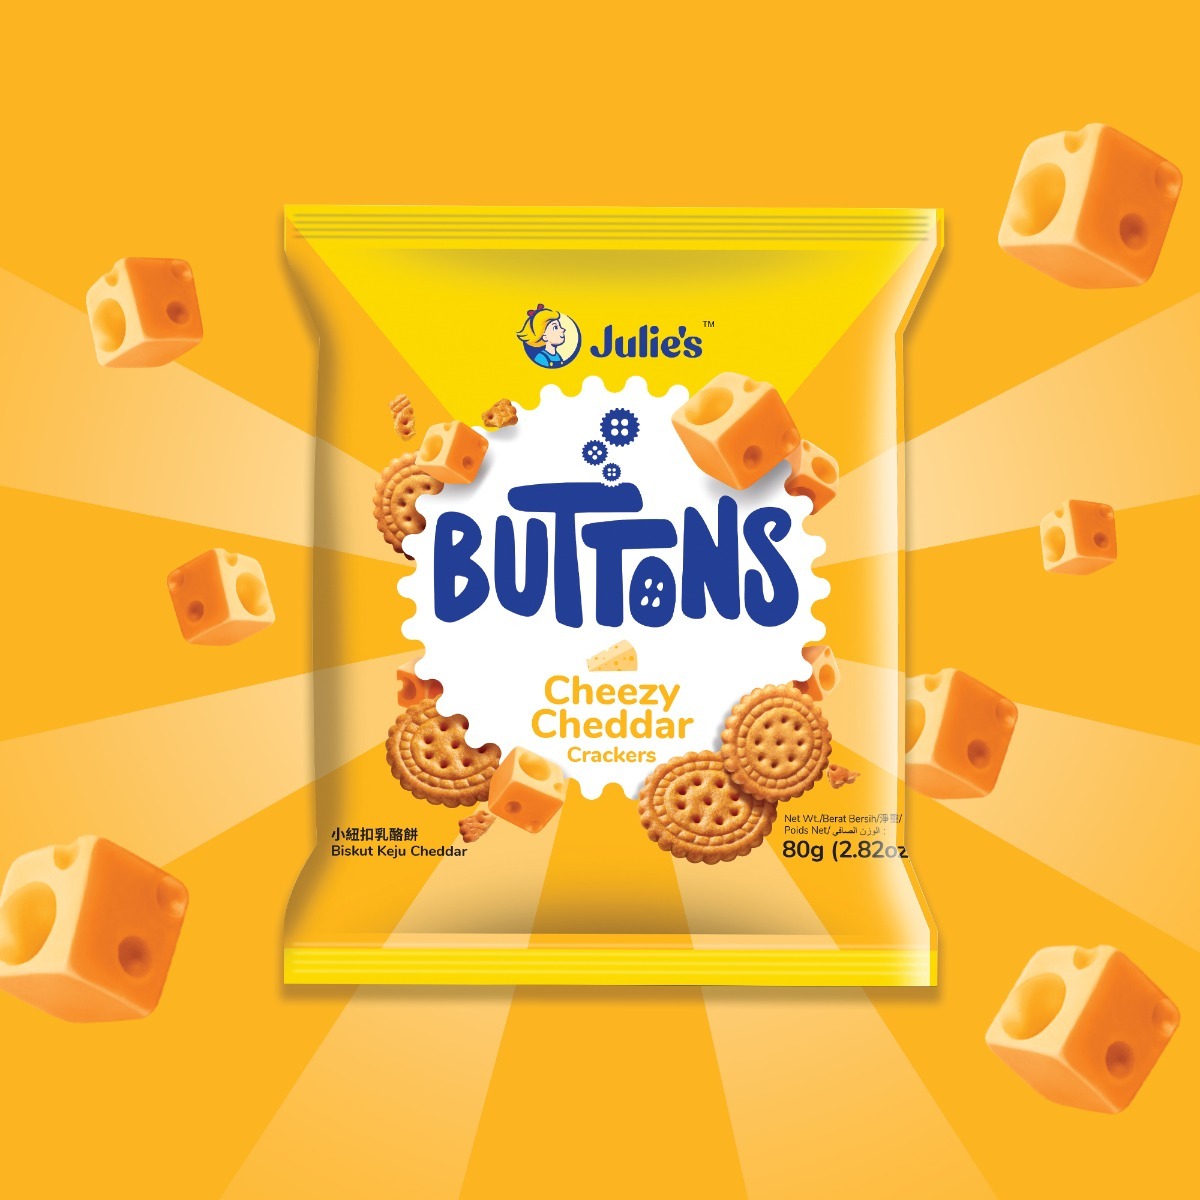 julie_s_buttons_cheezy_cheddar_crackers_80g_v2_1